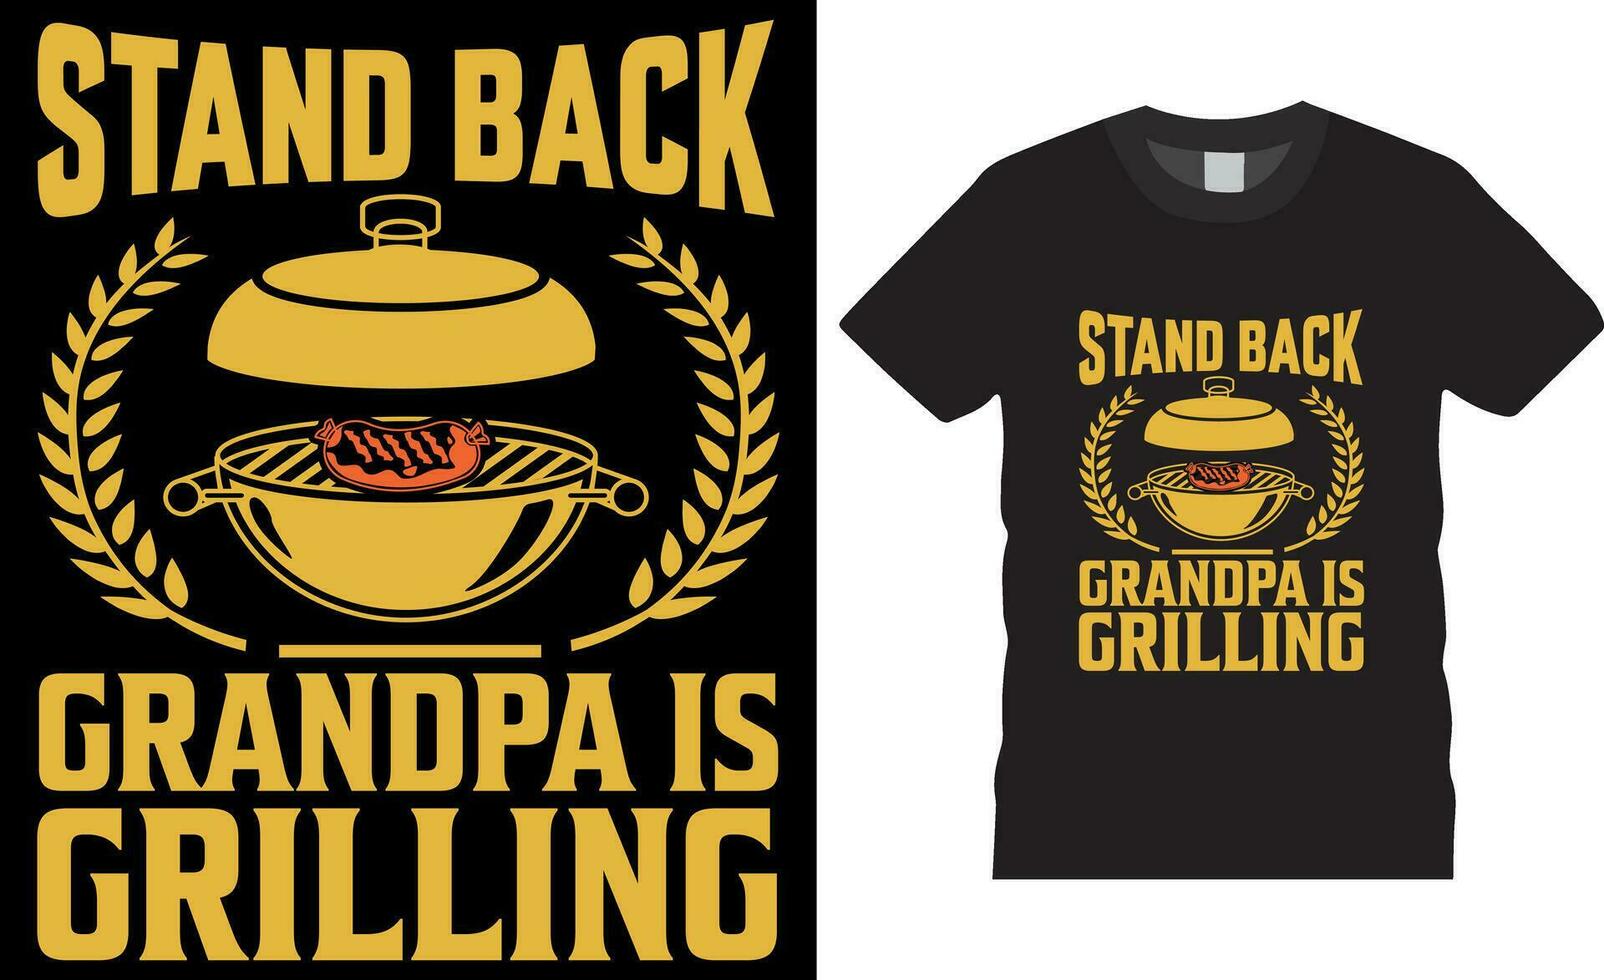 Stand Back Grandpa Is Grilling Family BBQ Funny T-Shirt design vector template.Stand Back Grandpa Is Grilling